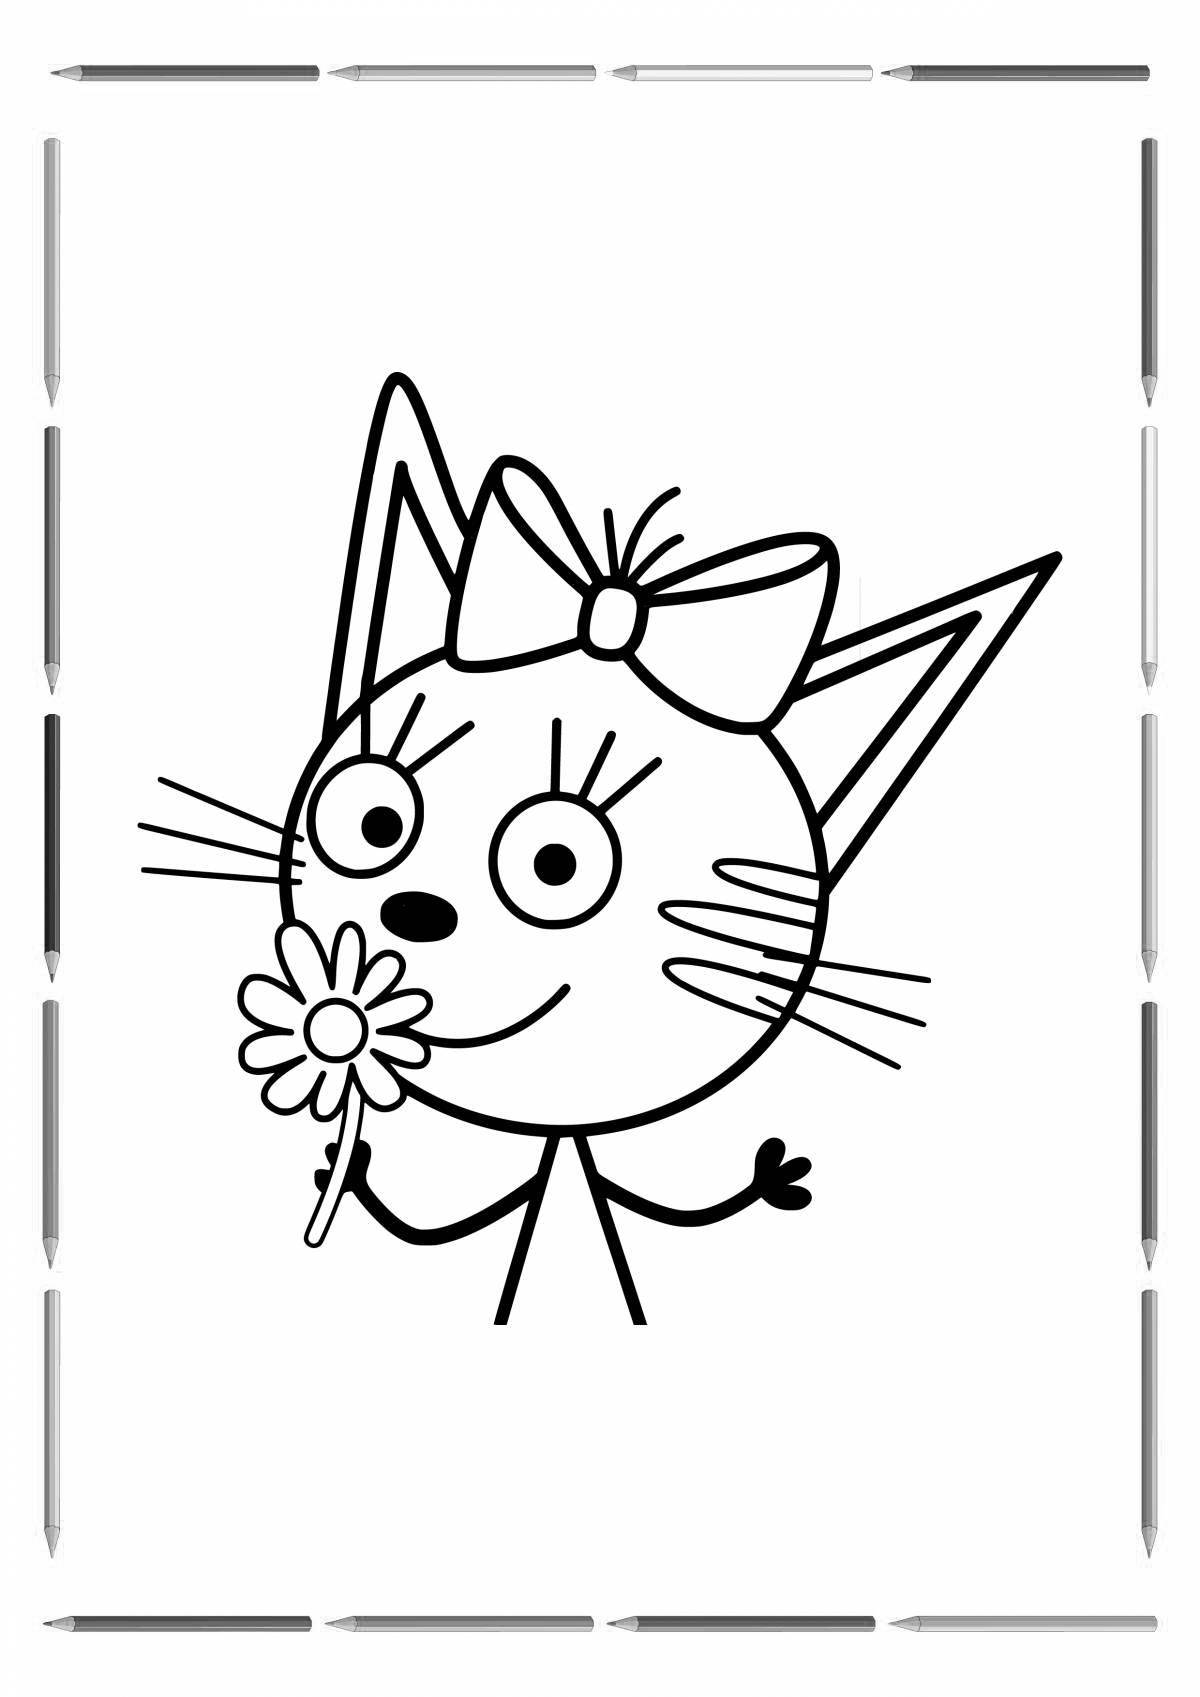 Cute coloring book for girls 3 years old 3 cats